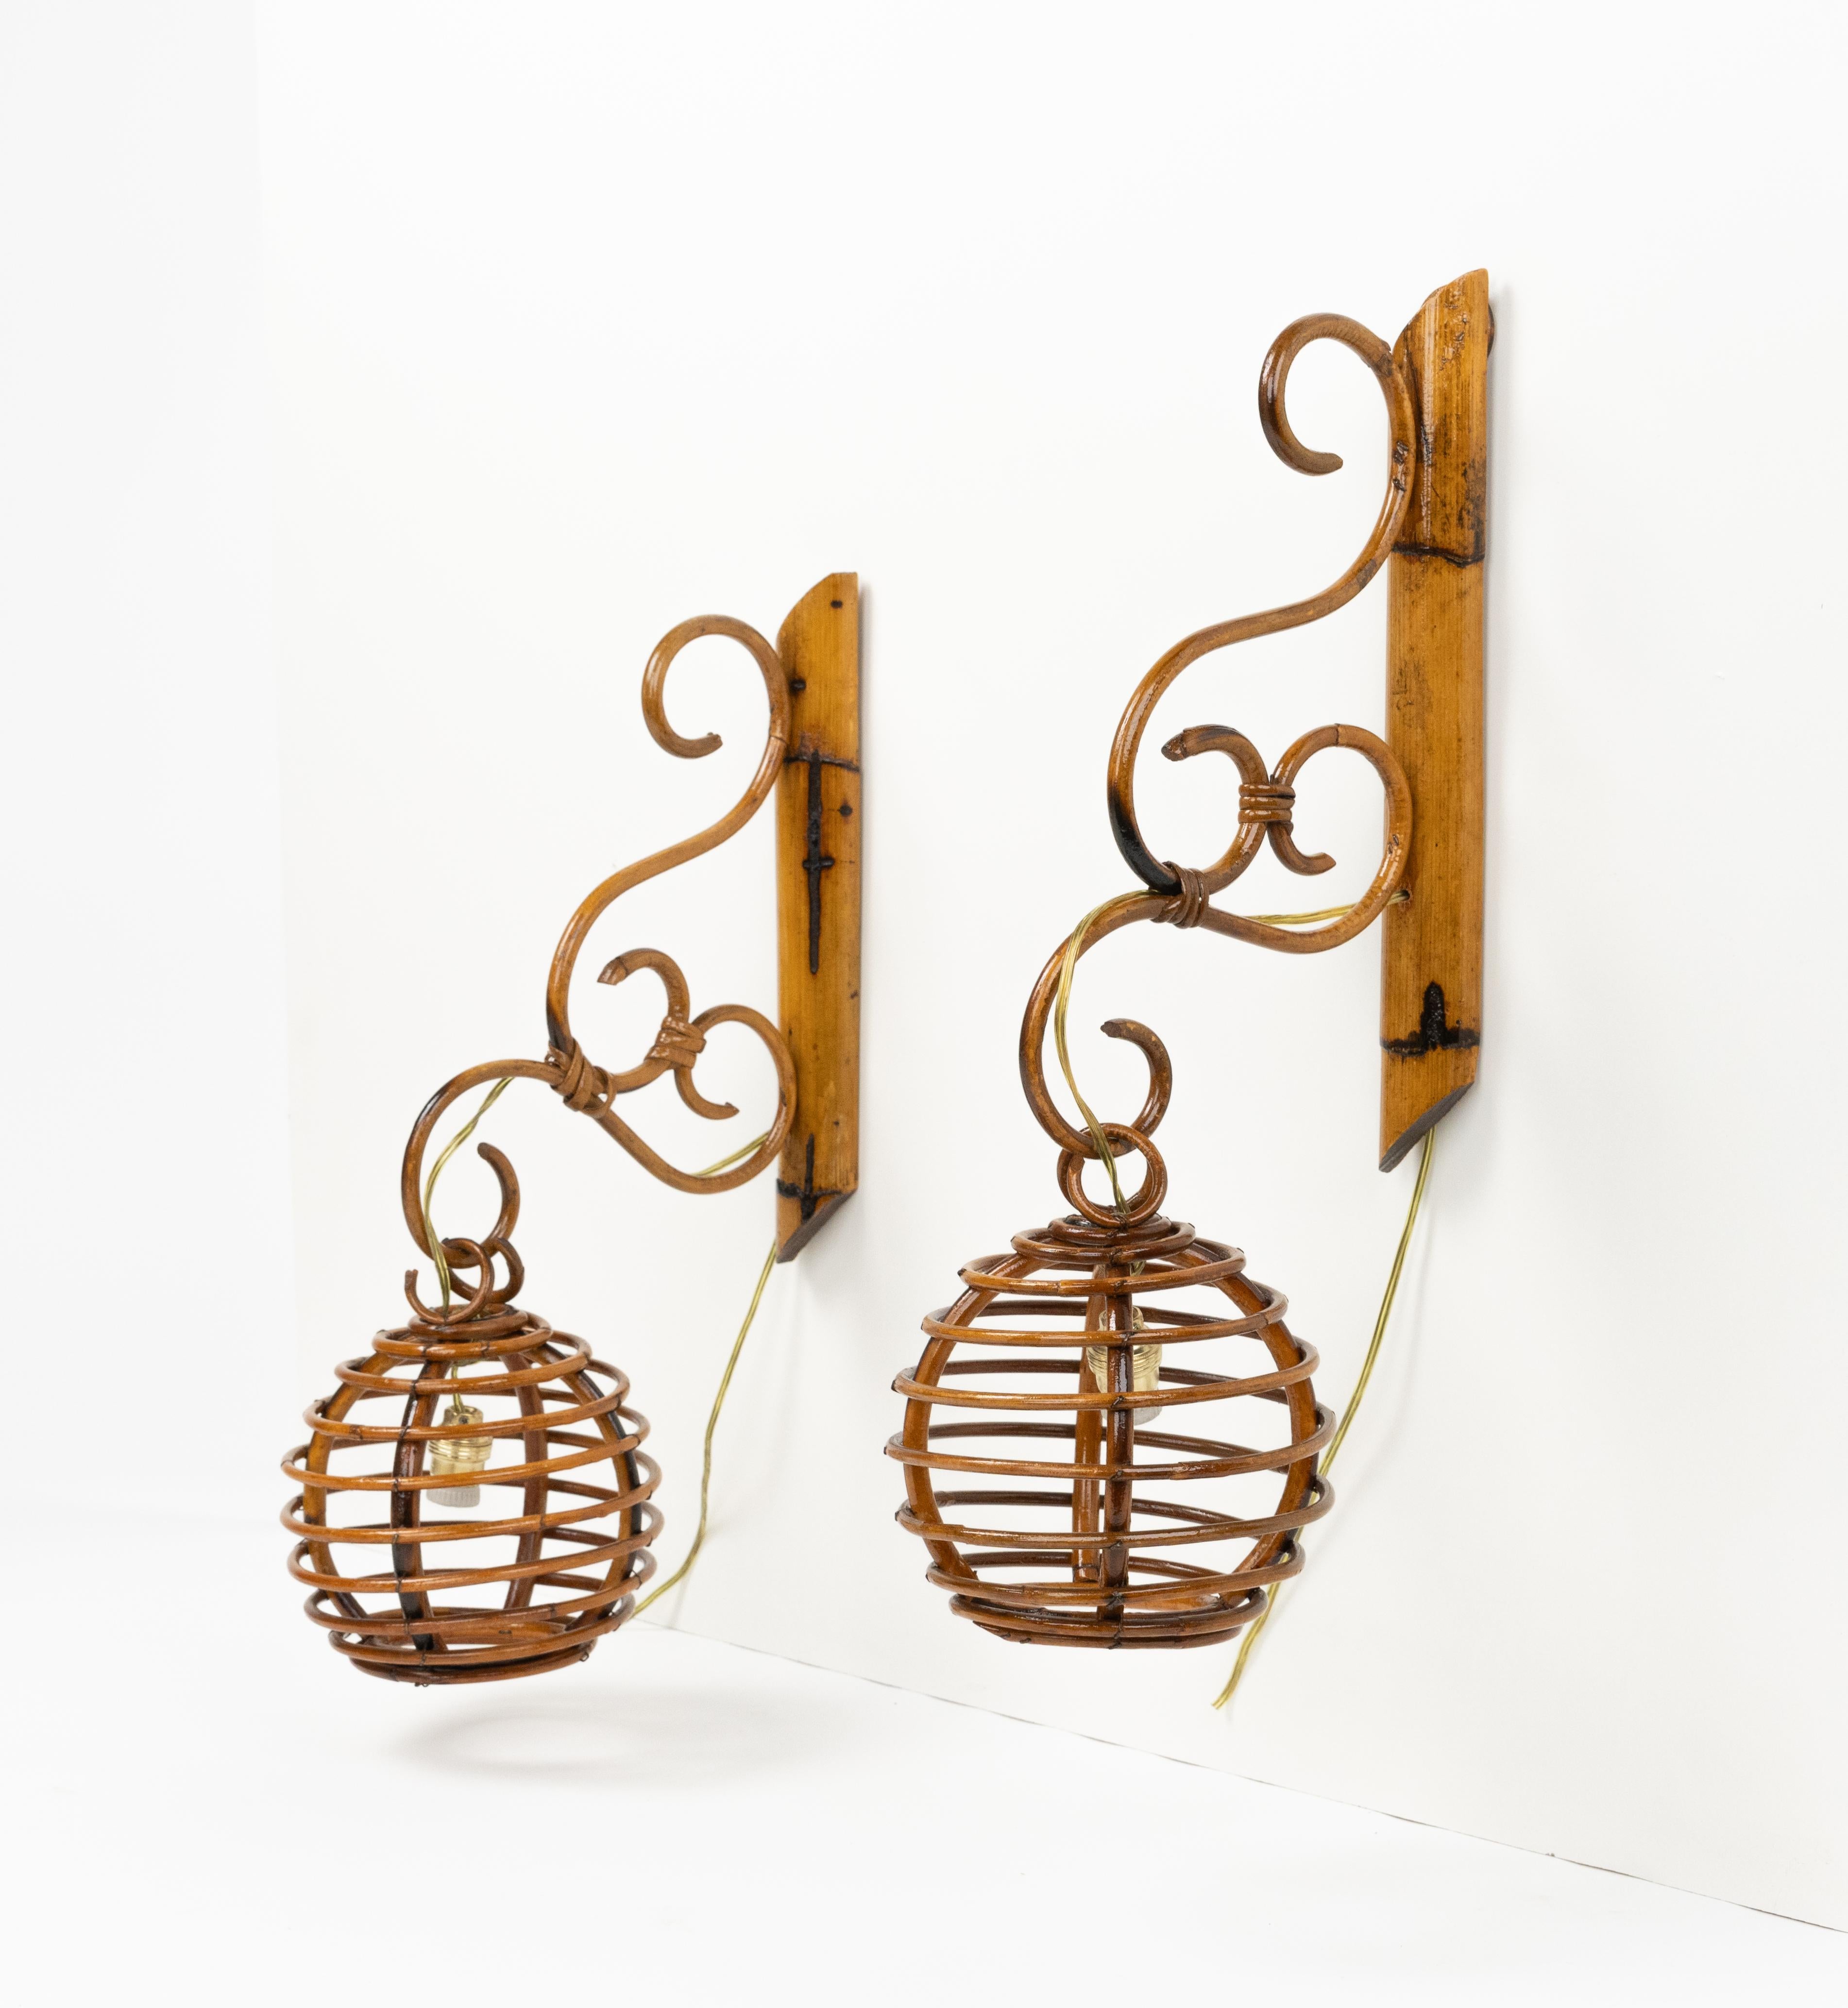 Mid-Century Modern Midcentury Pair of Sconces in Bamboo and Rattan Louis Sognot Style, Italy 1960s For Sale